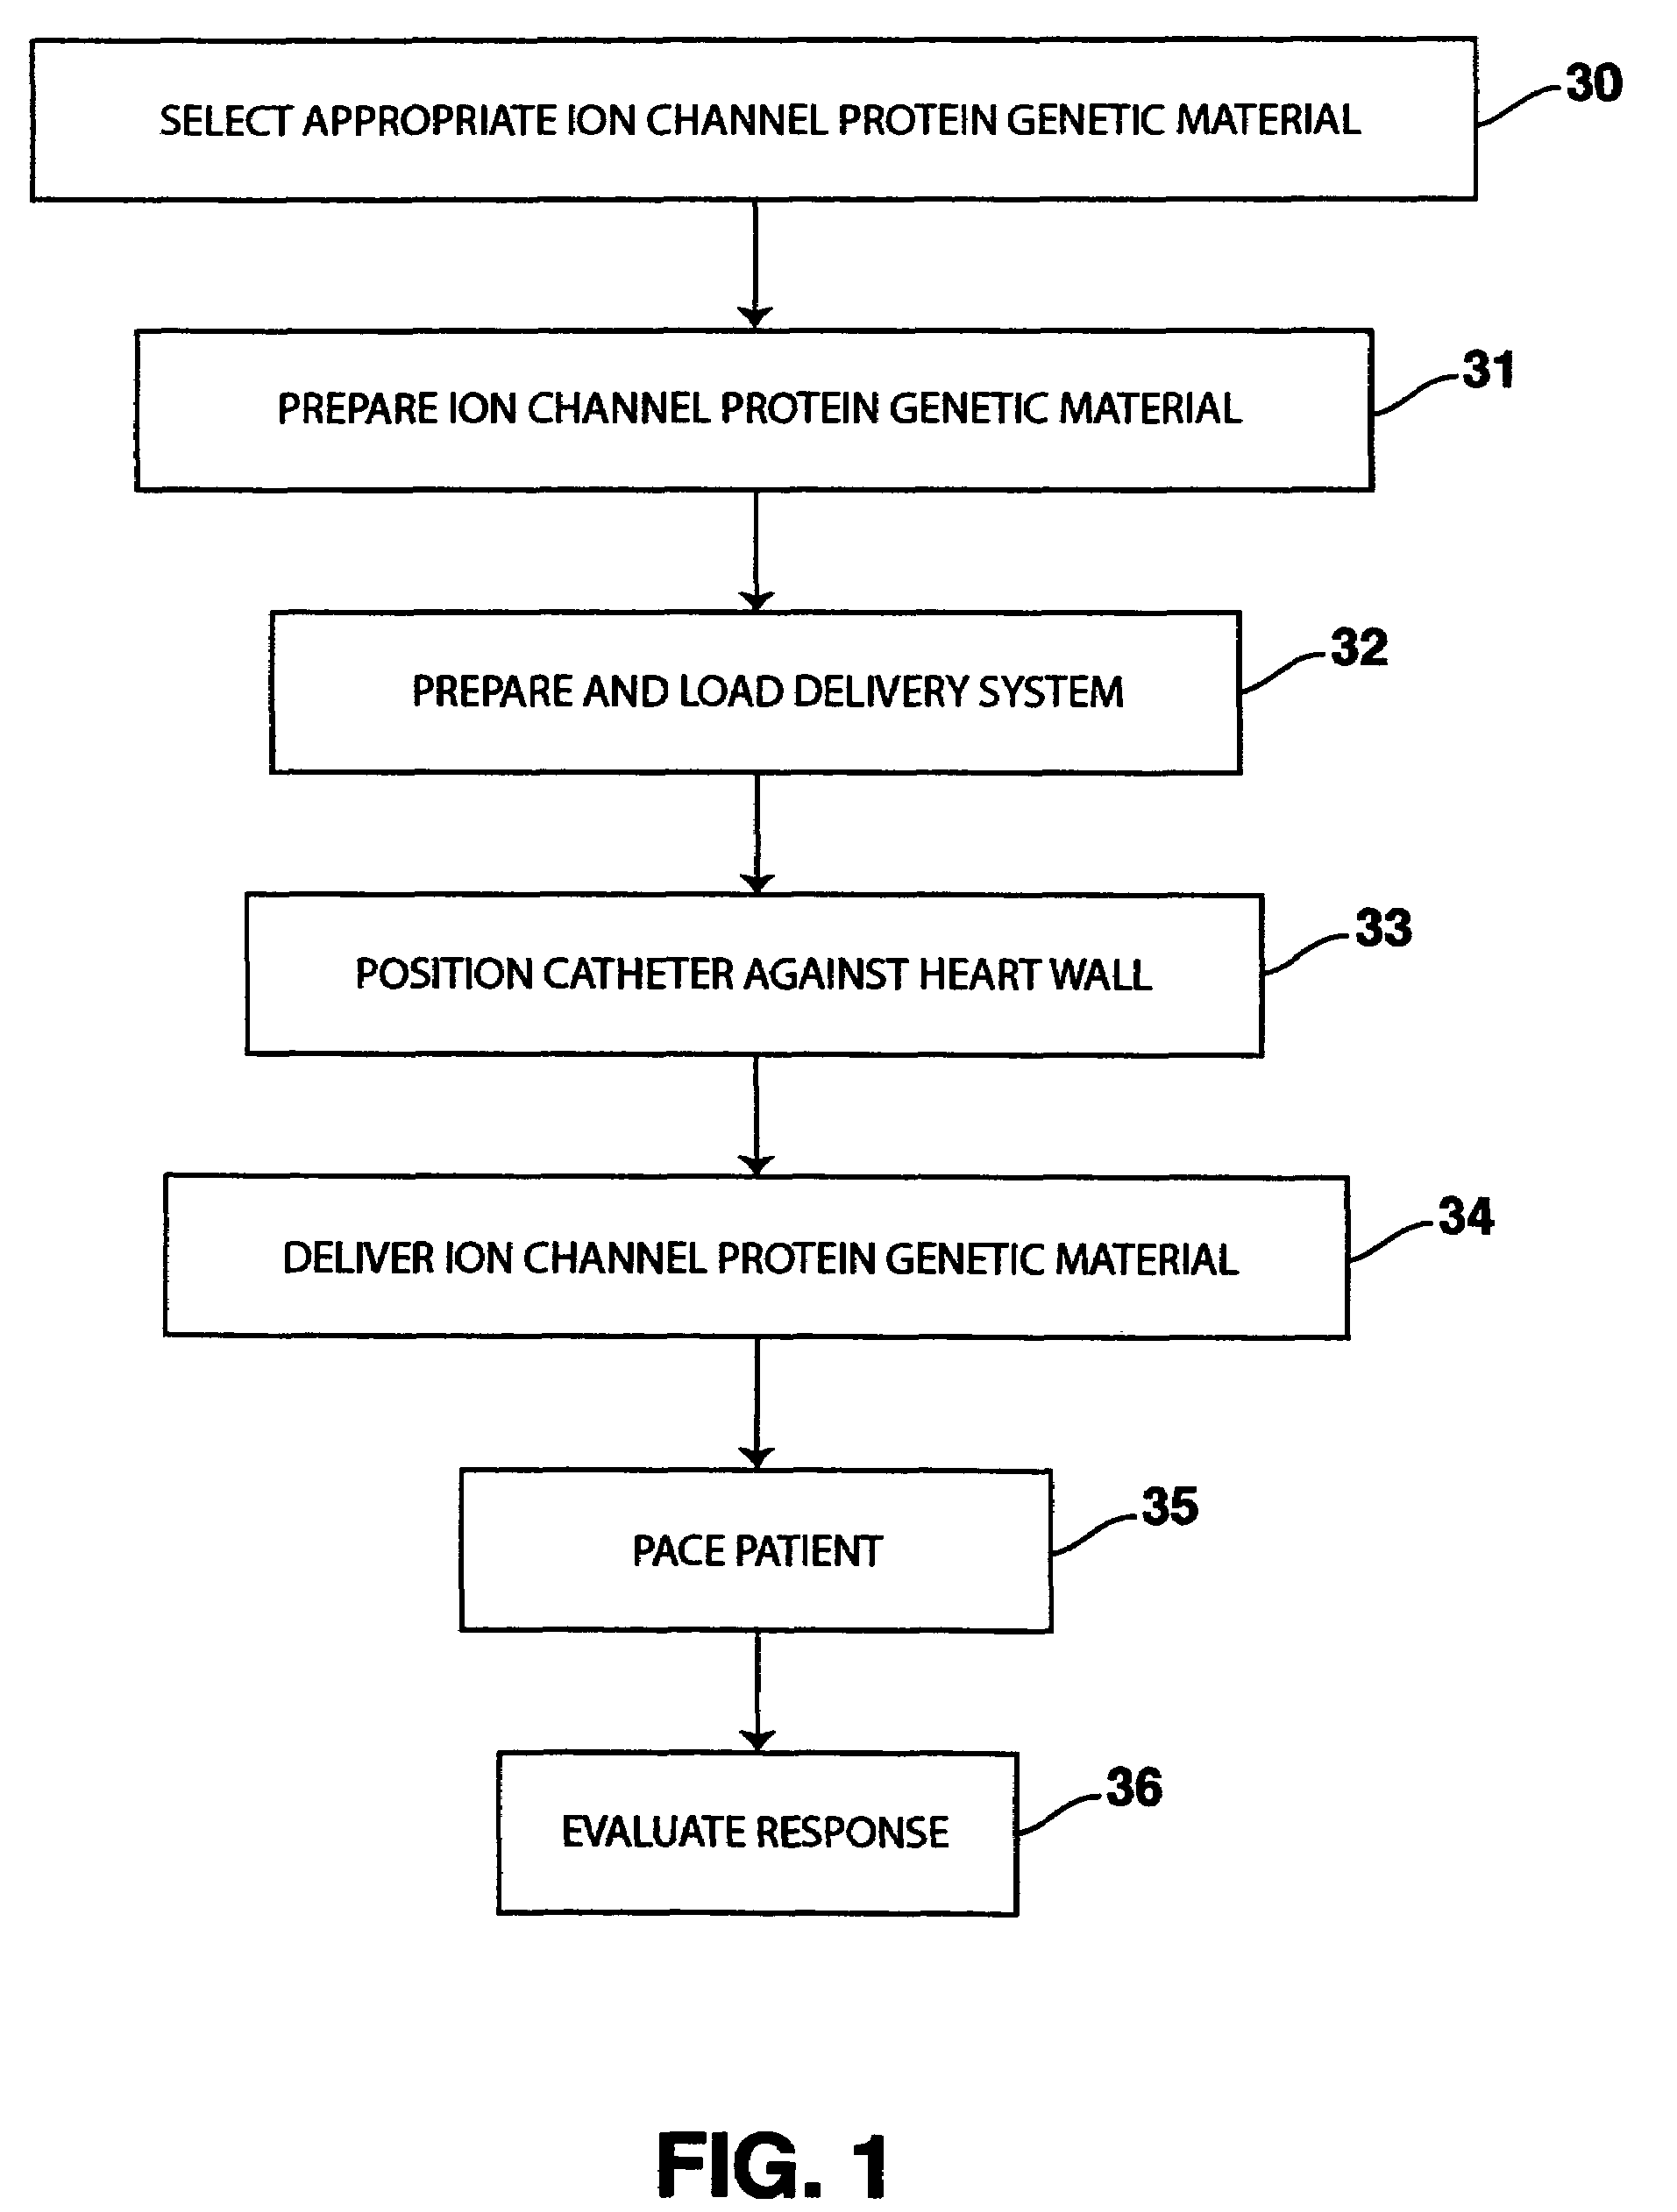 System and method for enhancing cardiac signal sensing by cardiac pacemakers through genetic treatment